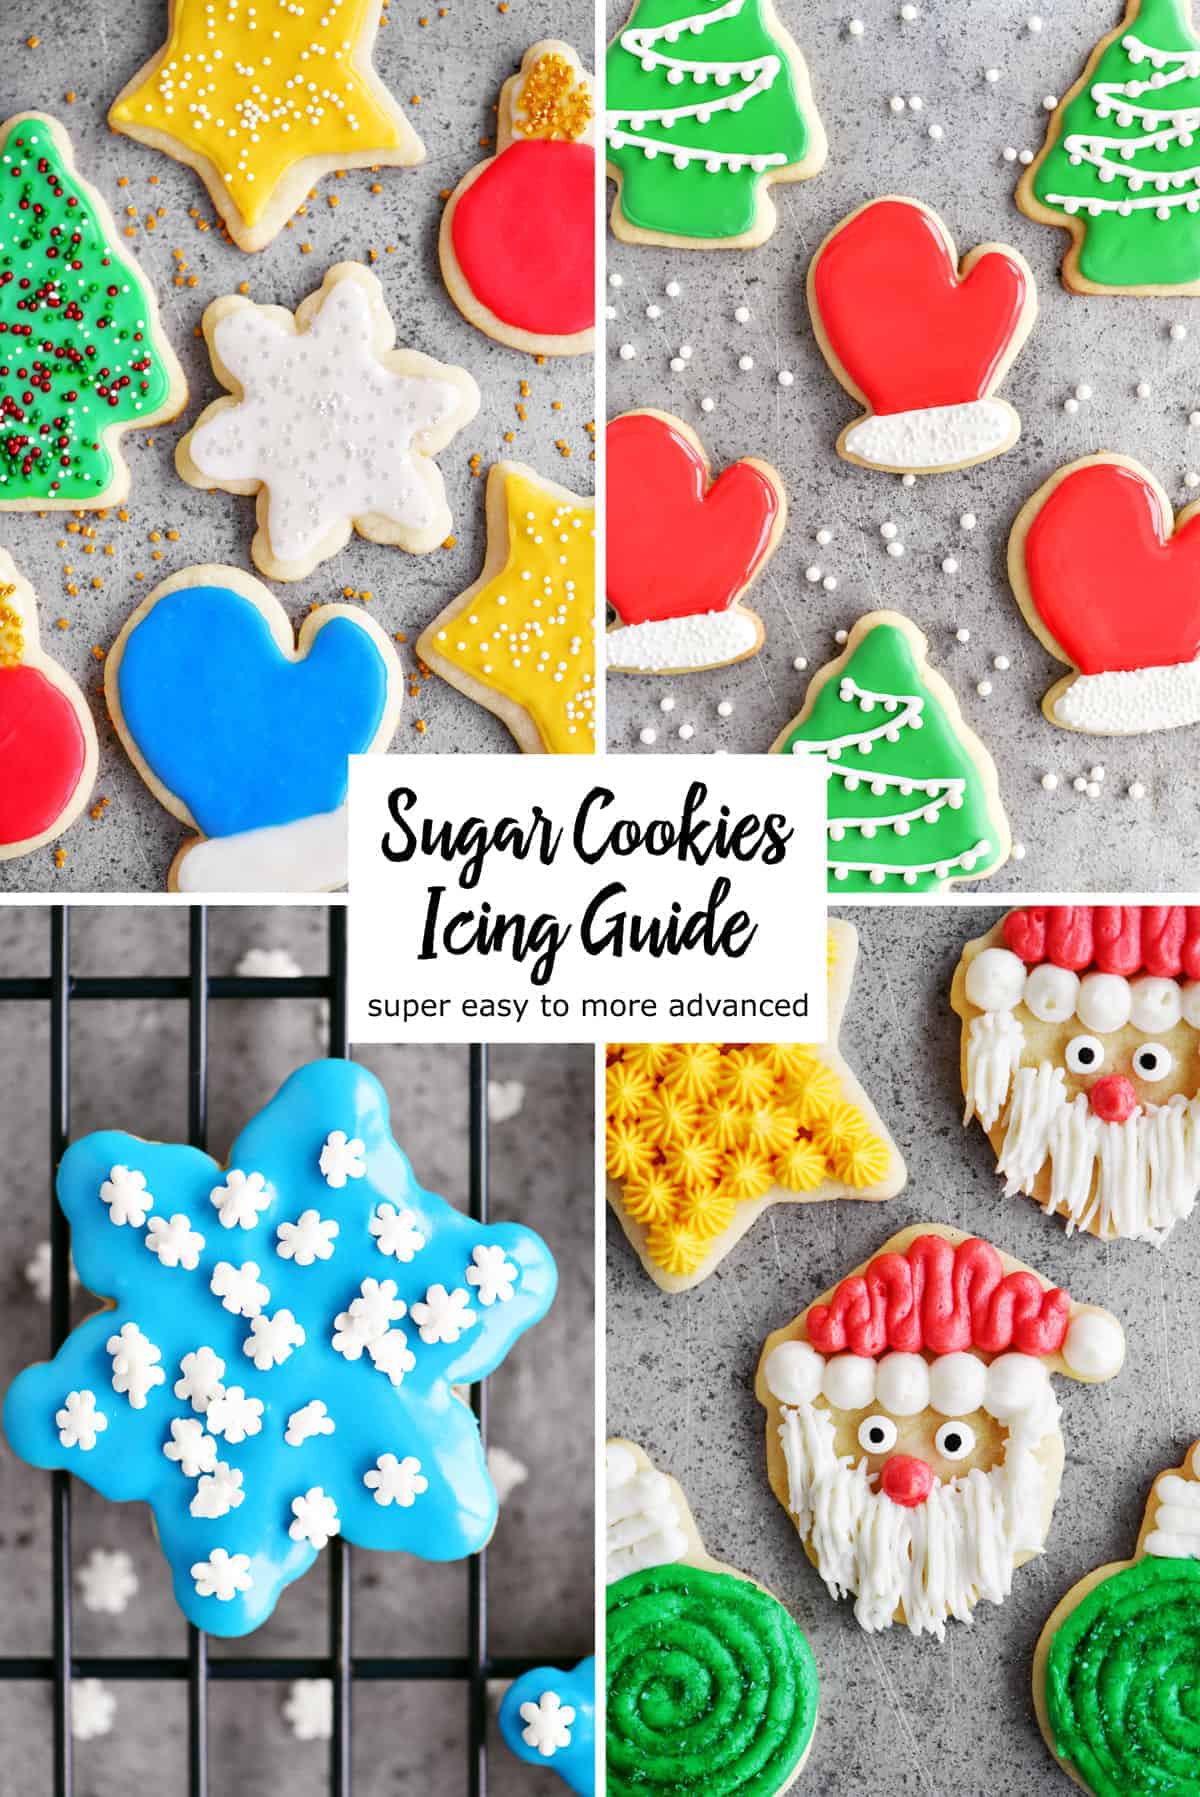 Sugar Cookies Icing Guide - The Gunny Sack